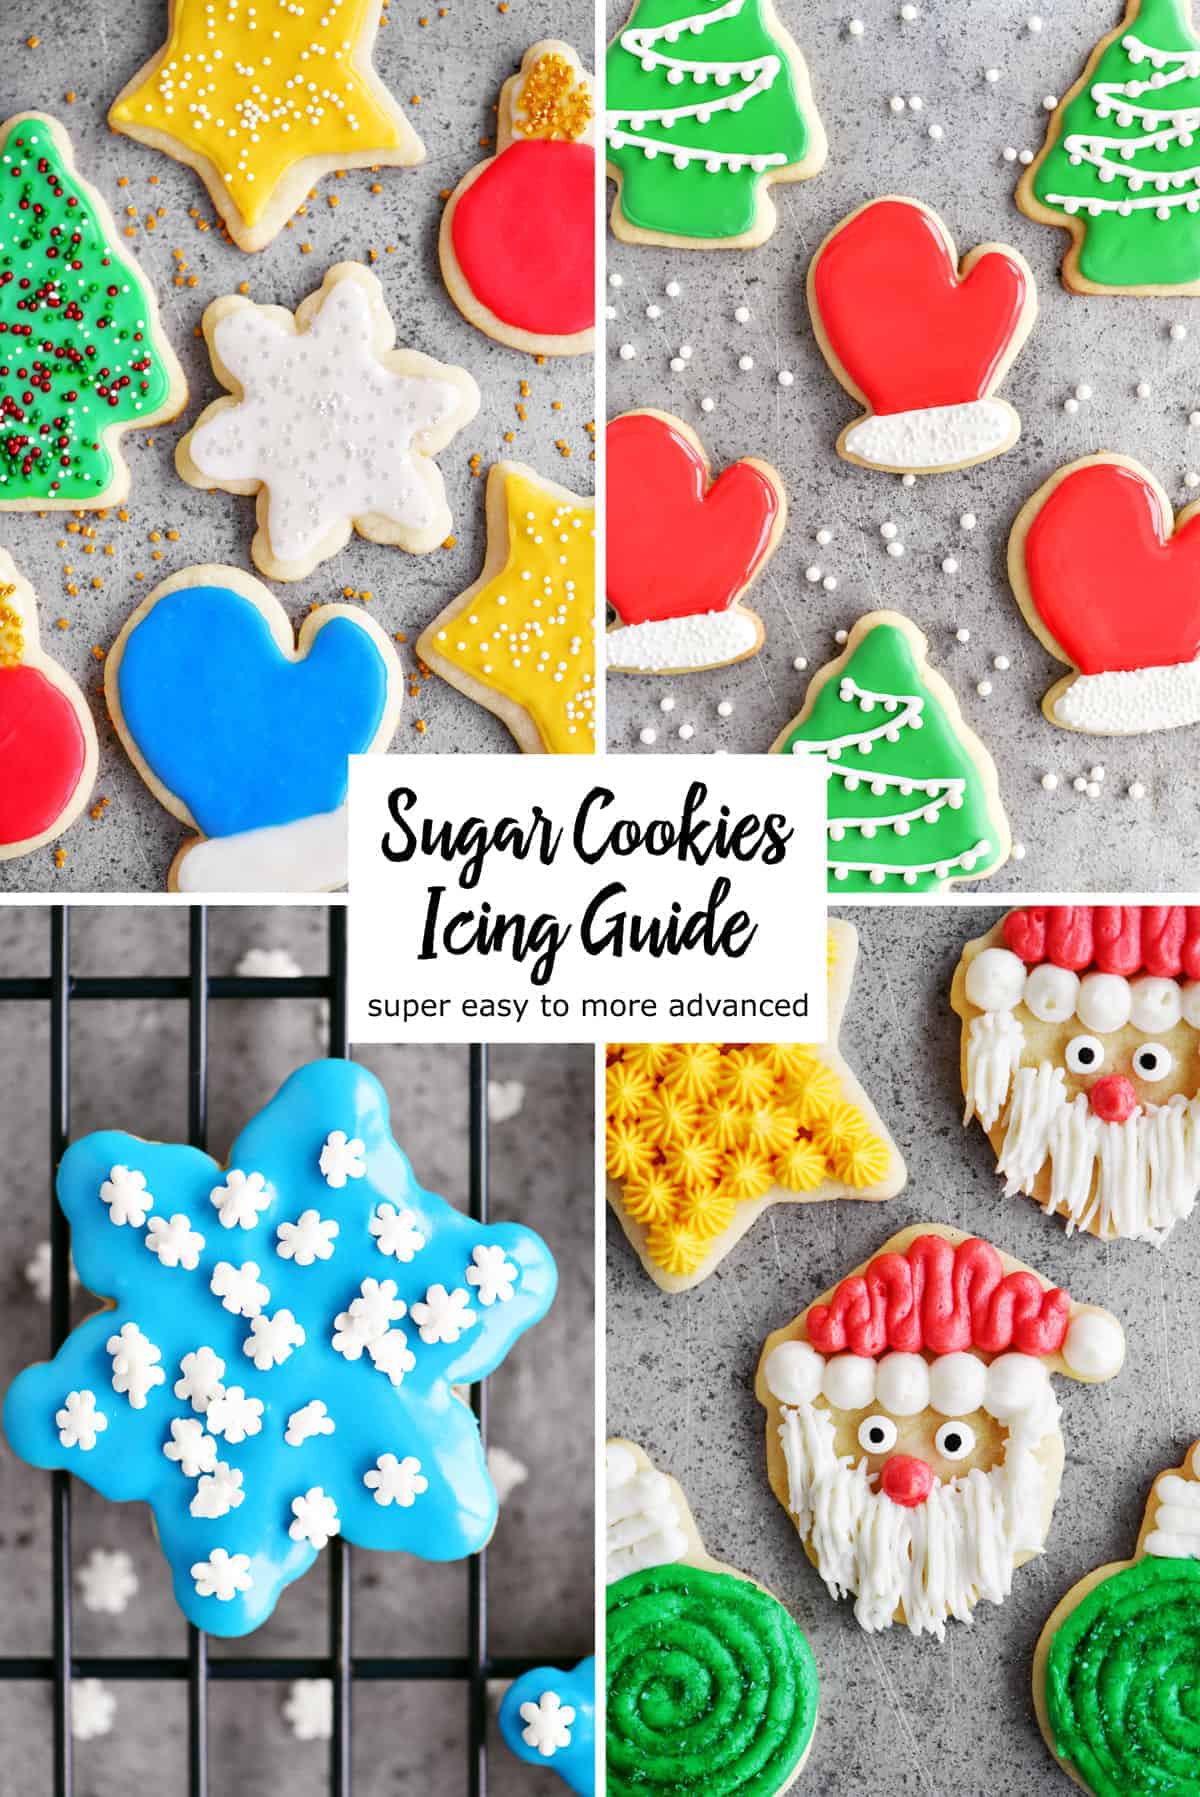 Sugar Cookies Icing Guide - The Gunny Sack